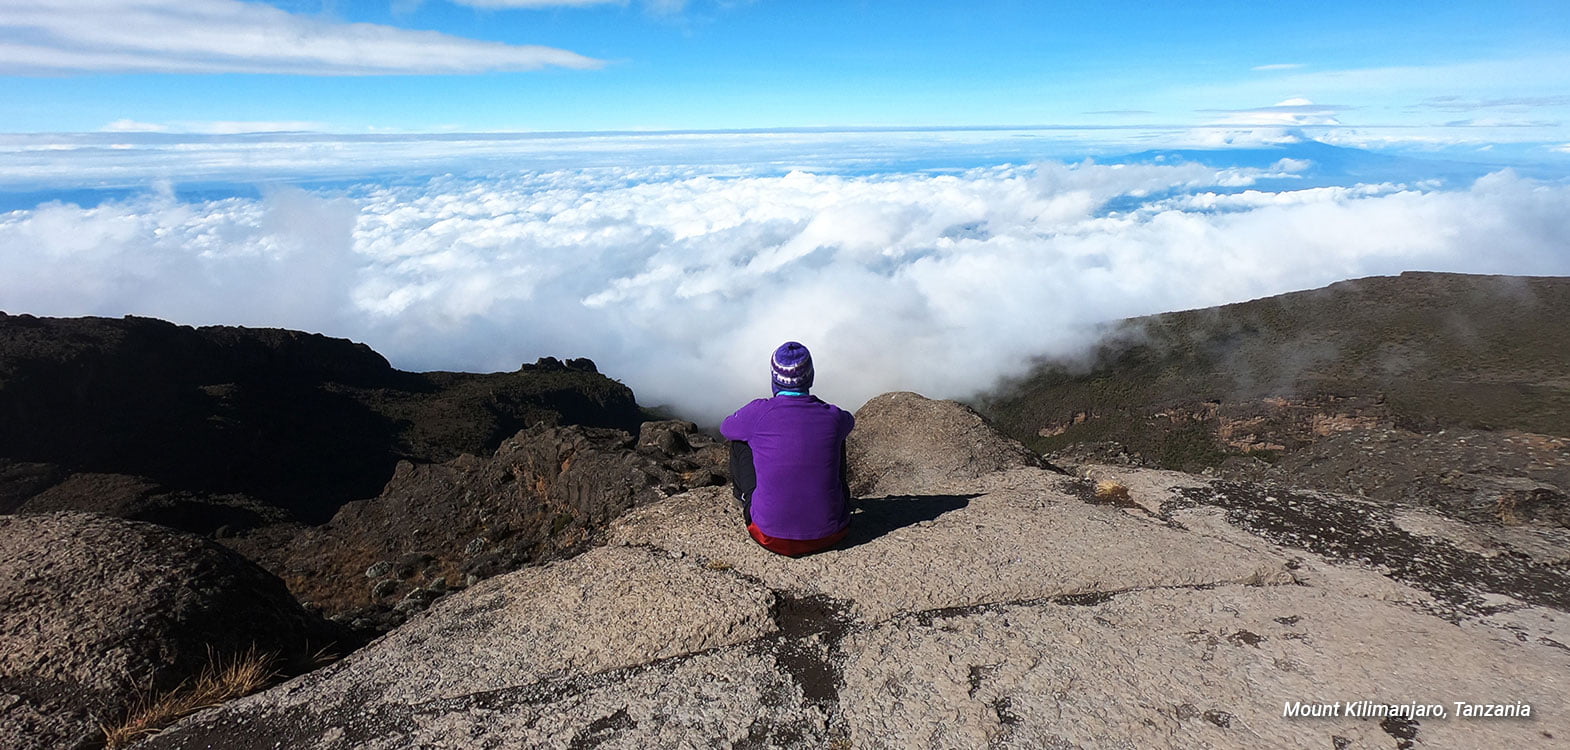 A blonde woman in a purple top and wooly hat sitting on a large flat rock high above the clouds at the top of a mountain